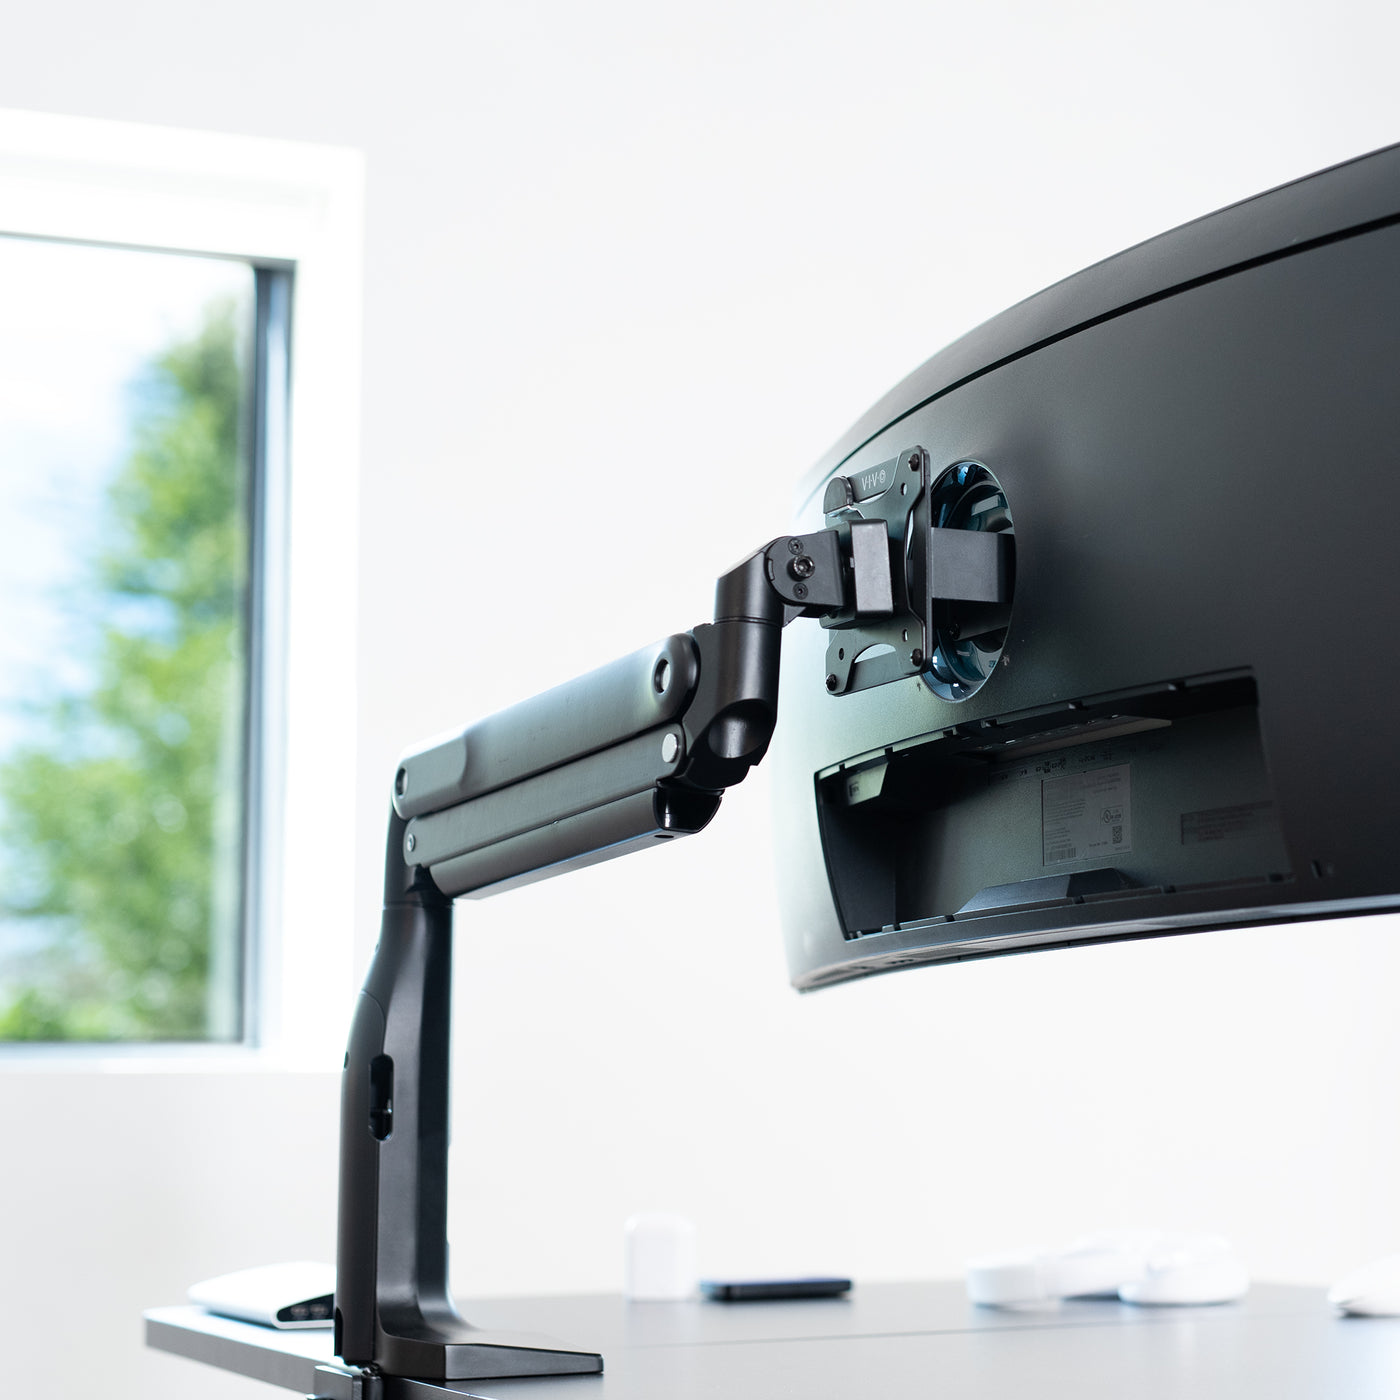 VESA Adapter Designed for Compatible Samsung Neo G9 allows your non VESA compatible monitor to be mounted to a stand of your choice.